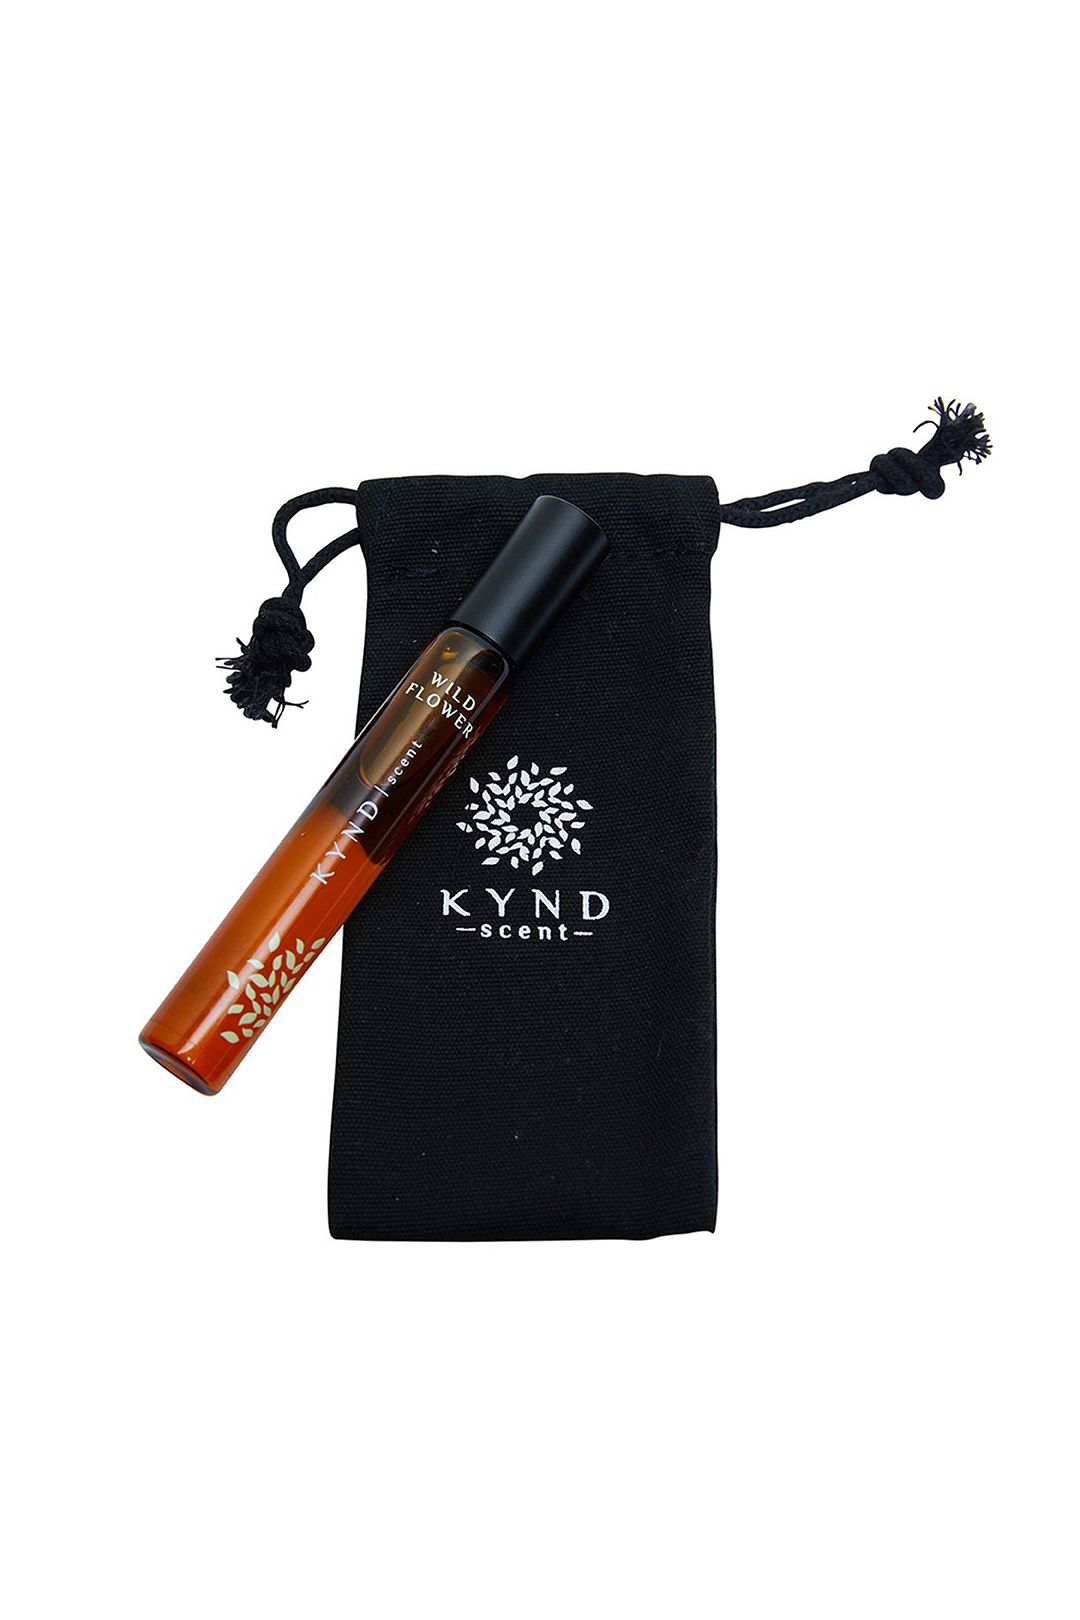 kynd-scent-wild-flower-product-3